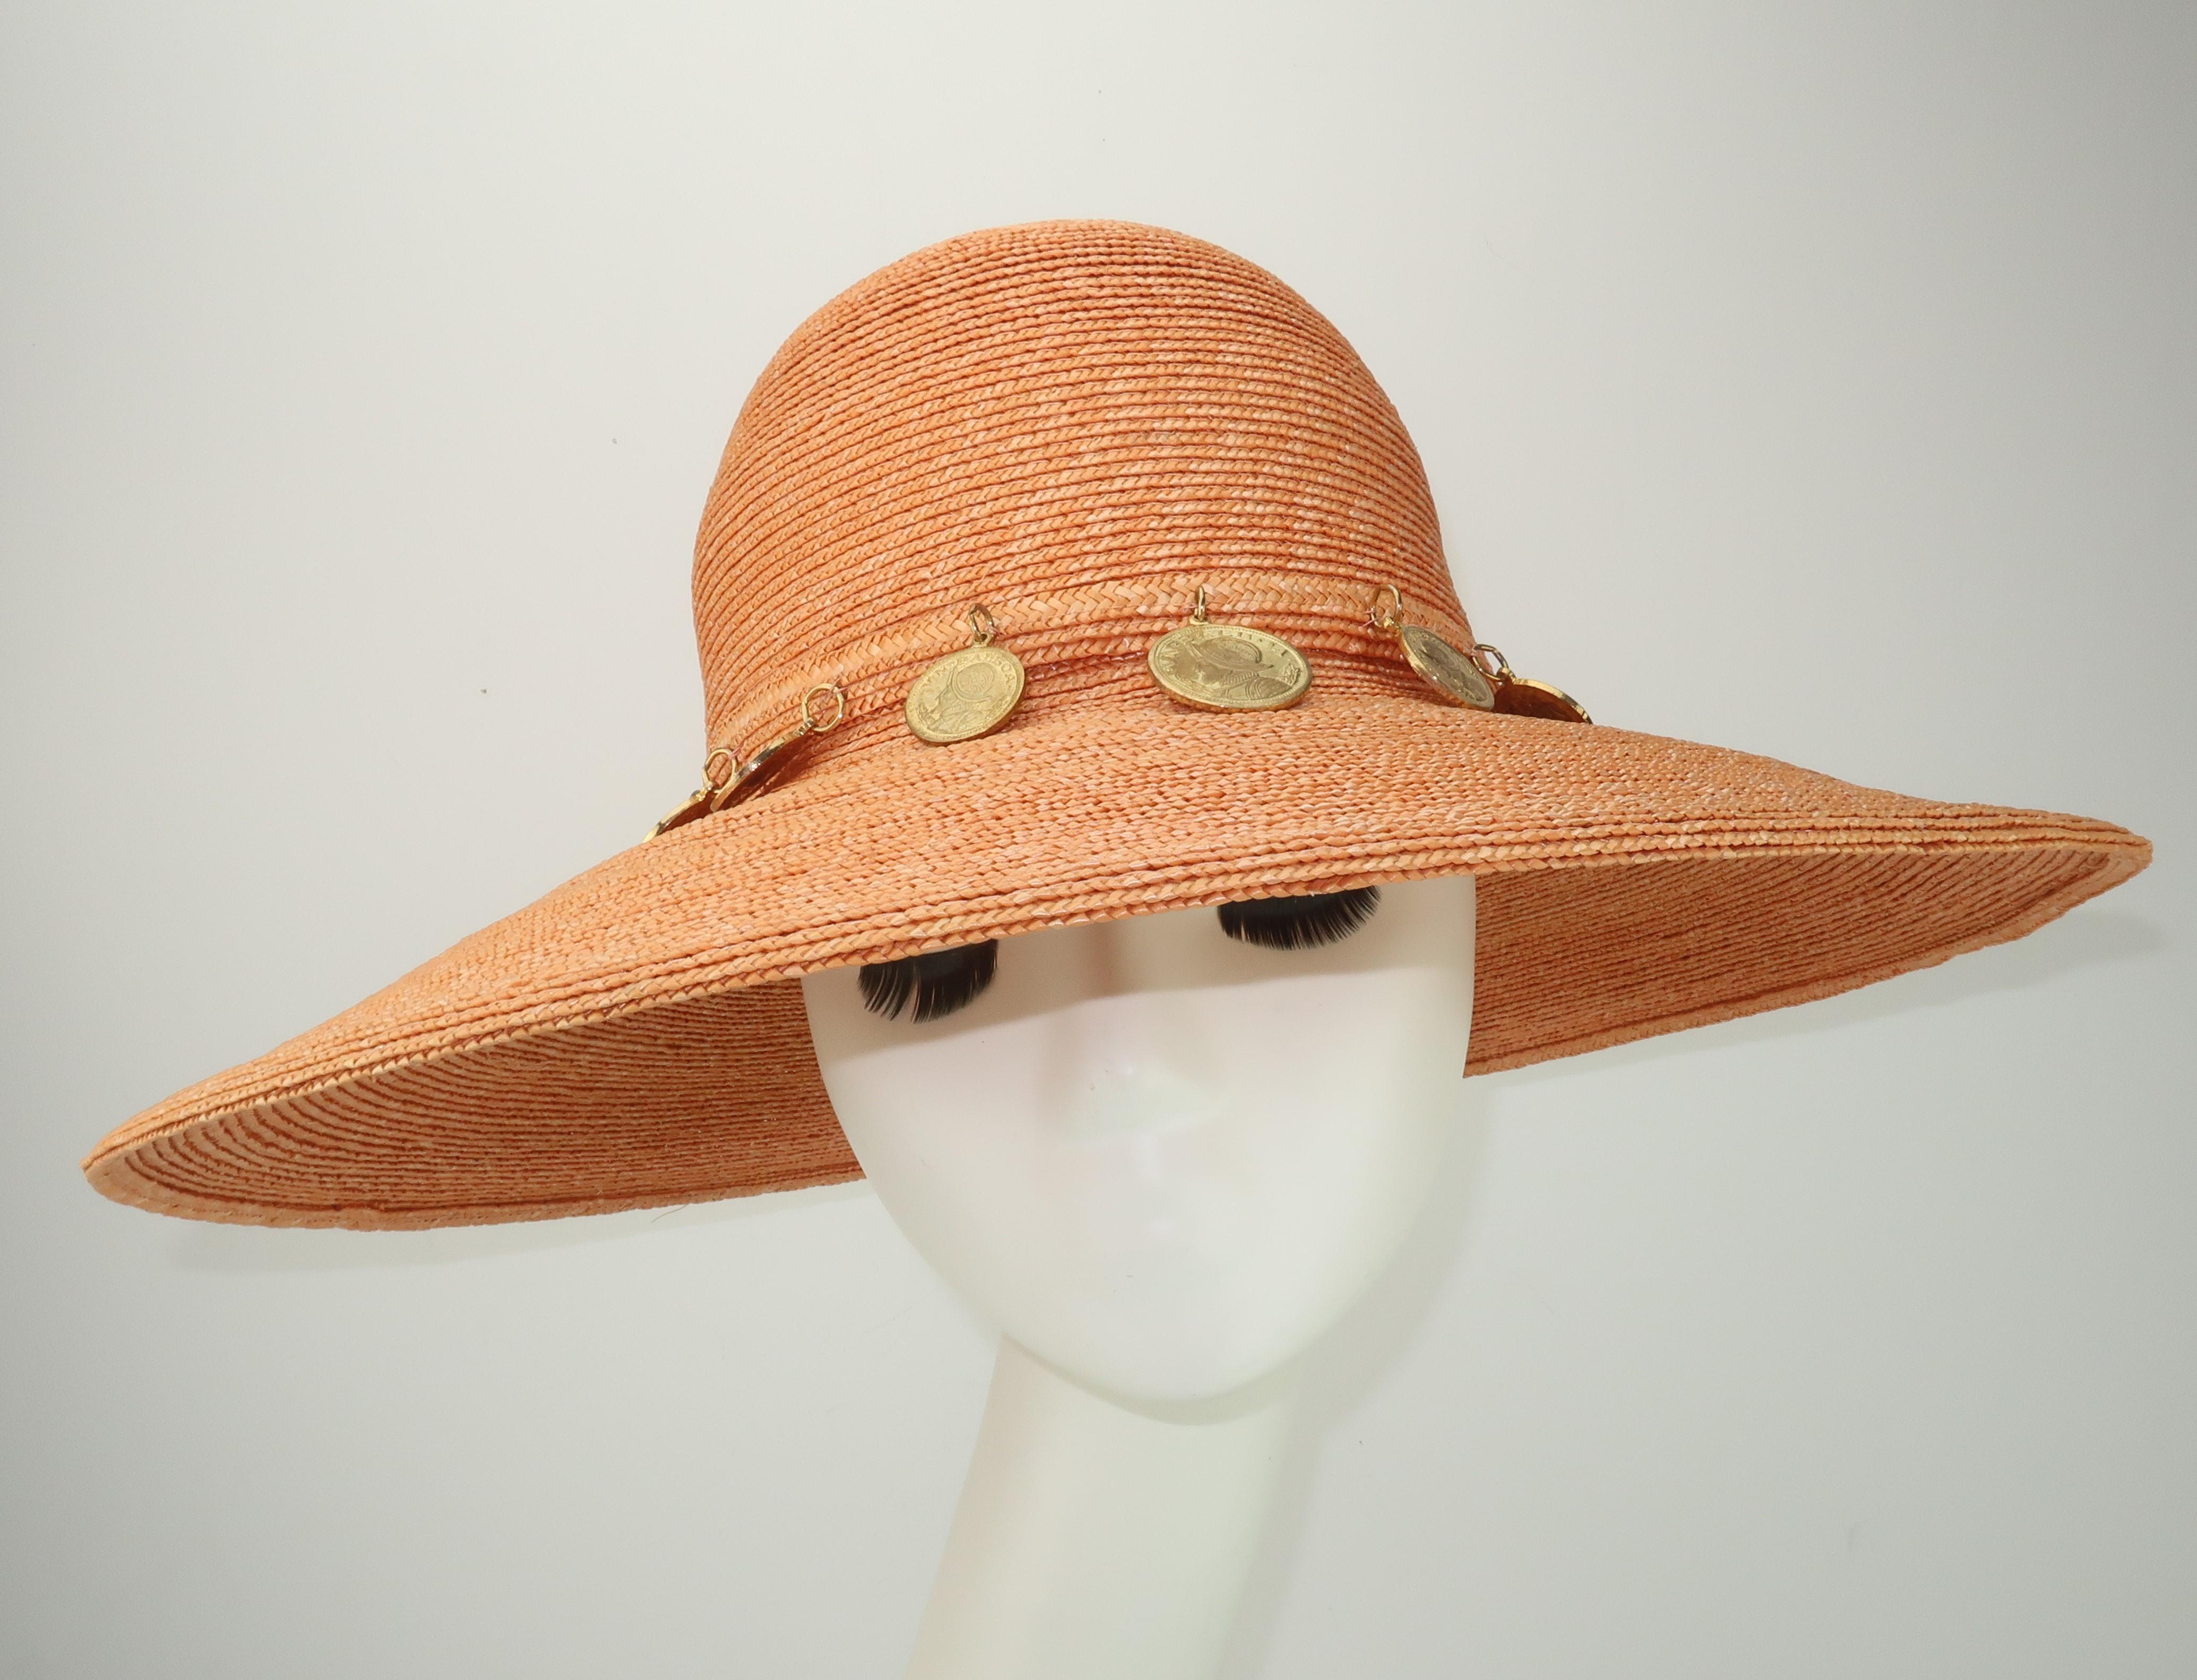 1980's wide brim hat in a cantaloupe orange straw (light enough to be neutral) accented by faux Spanish gold coins.  The inner rim is trimmed in a hot pink grosgrain ribbon.  Perfect for adding a chic style to beach wear or summertime casuals.  No